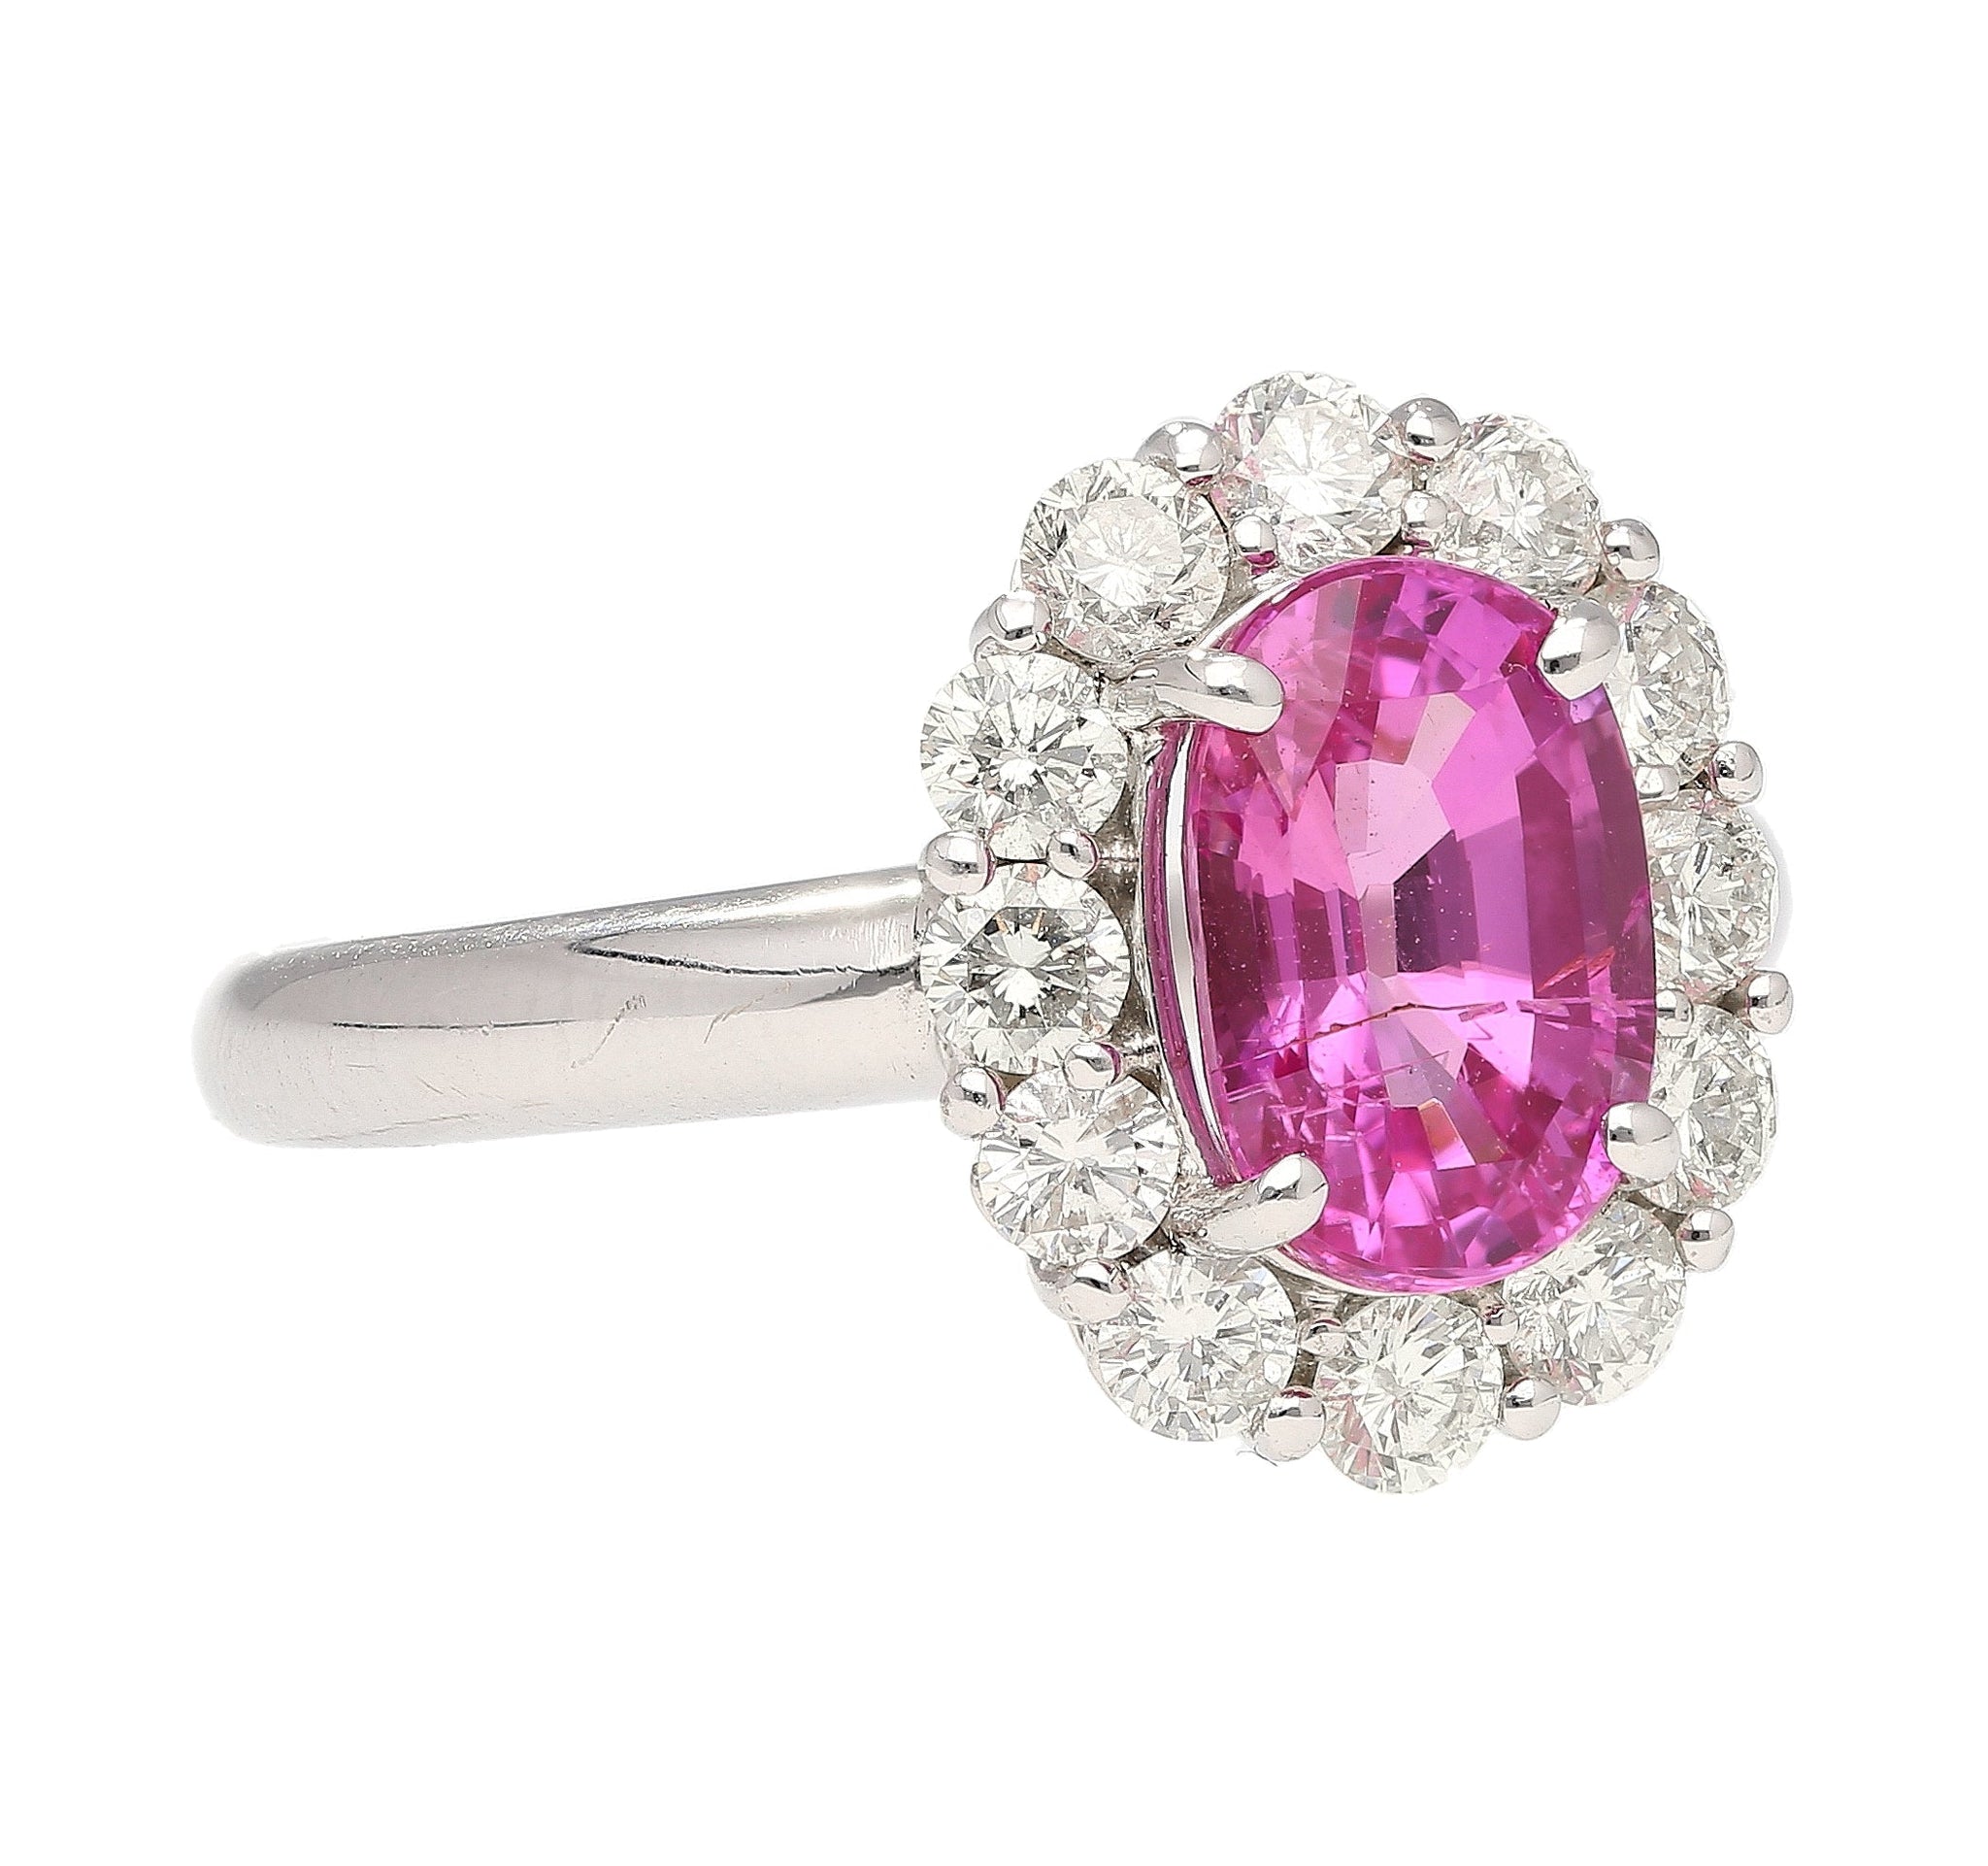 CGTL Certified 3.96 Carat Oval Cut Pink Sapphire and Diamond Halo Ring in 18k White Gold